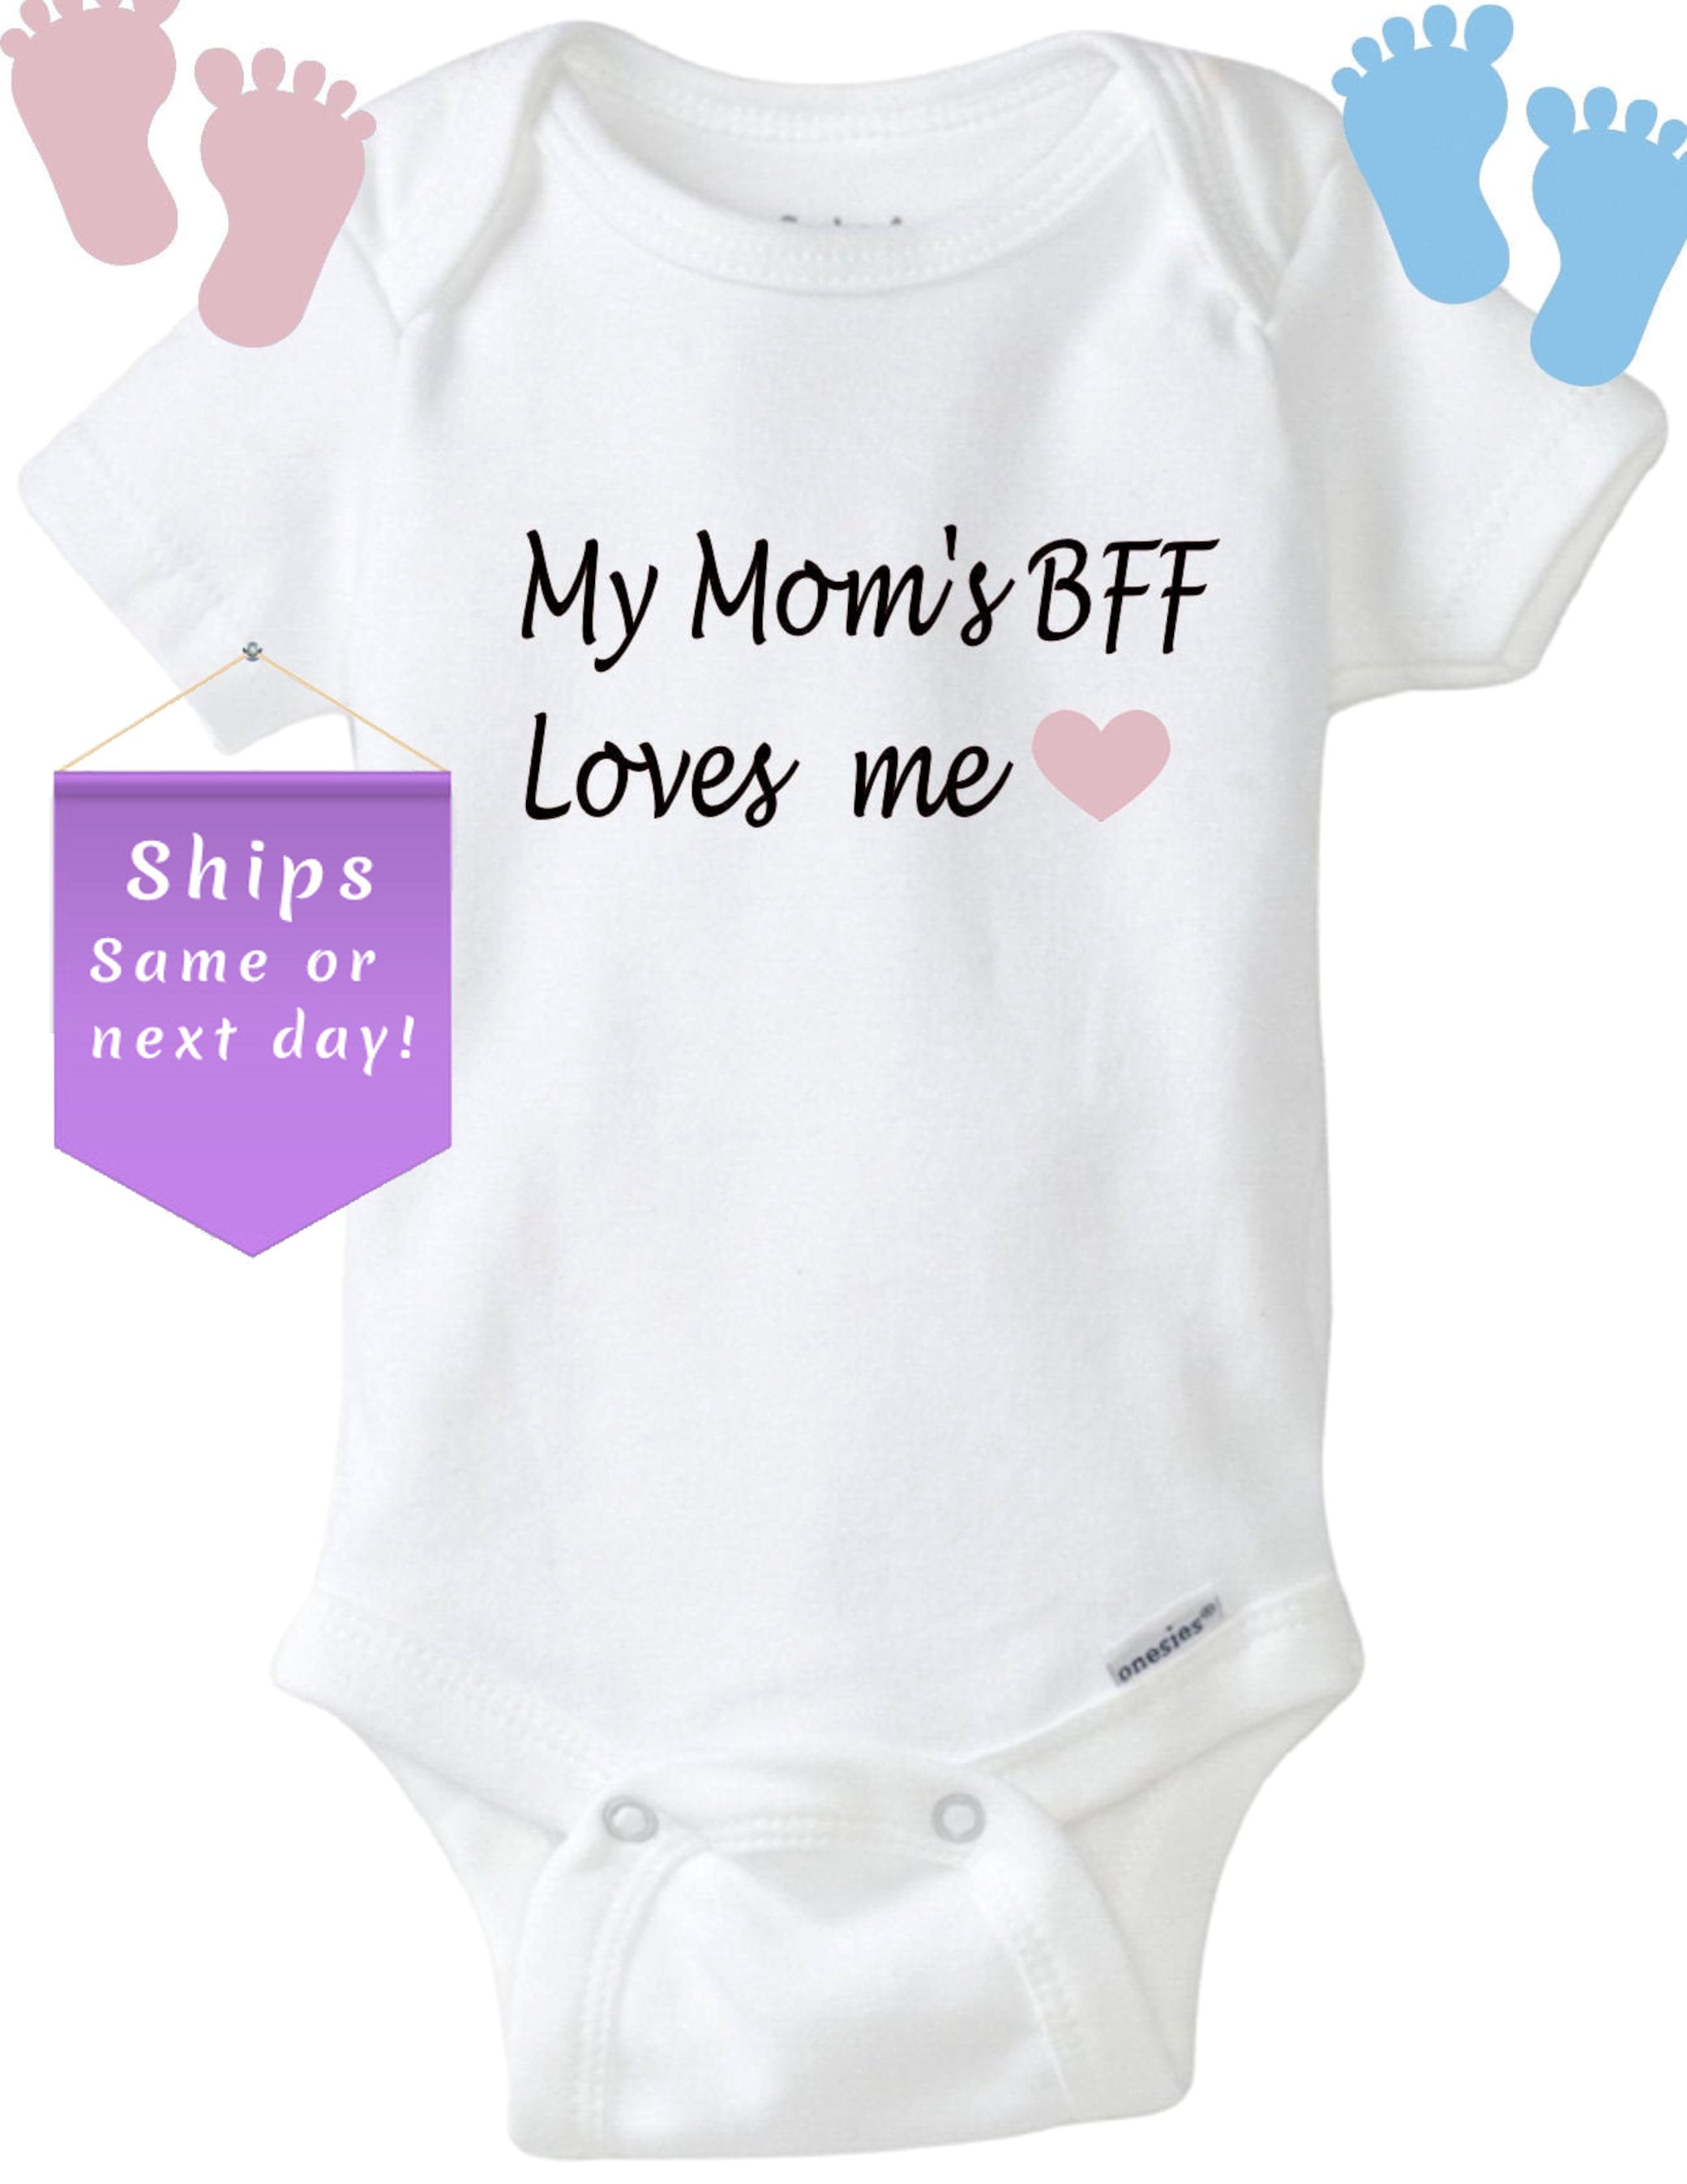 FUNNY one piece body suit Great Baby Shower Gift Is it Legal to have.